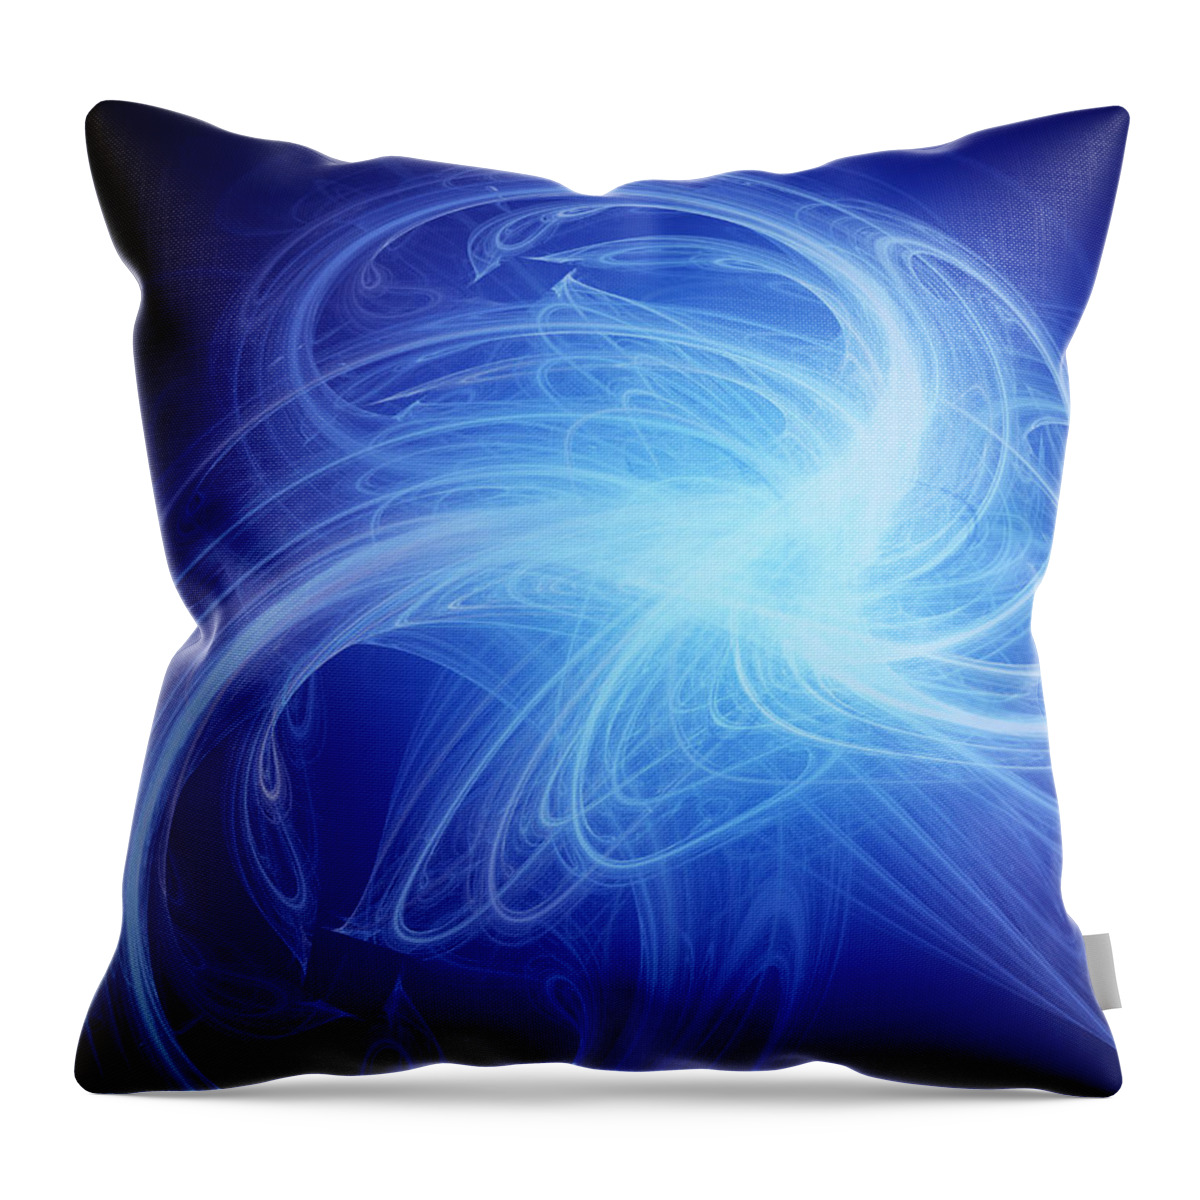 Crystal Glassware Throw Pillow featuring the photograph Blue Spiral by Alwyncooper